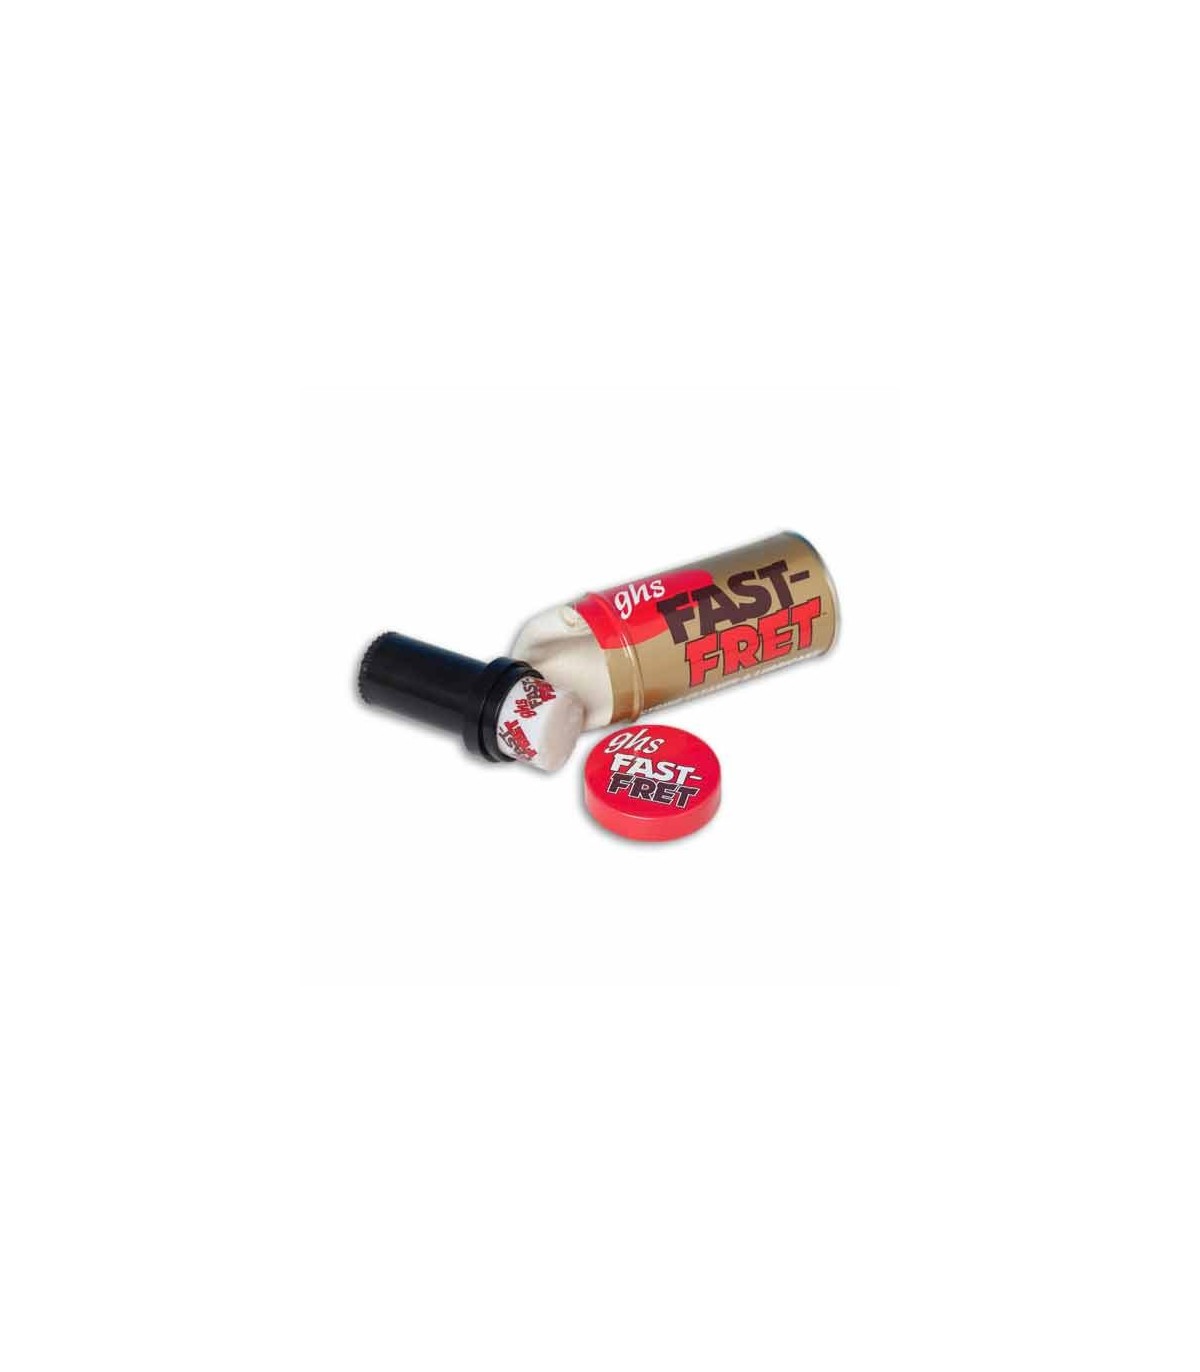 GHS A-87 Fast Fret for guitar, Lubricant